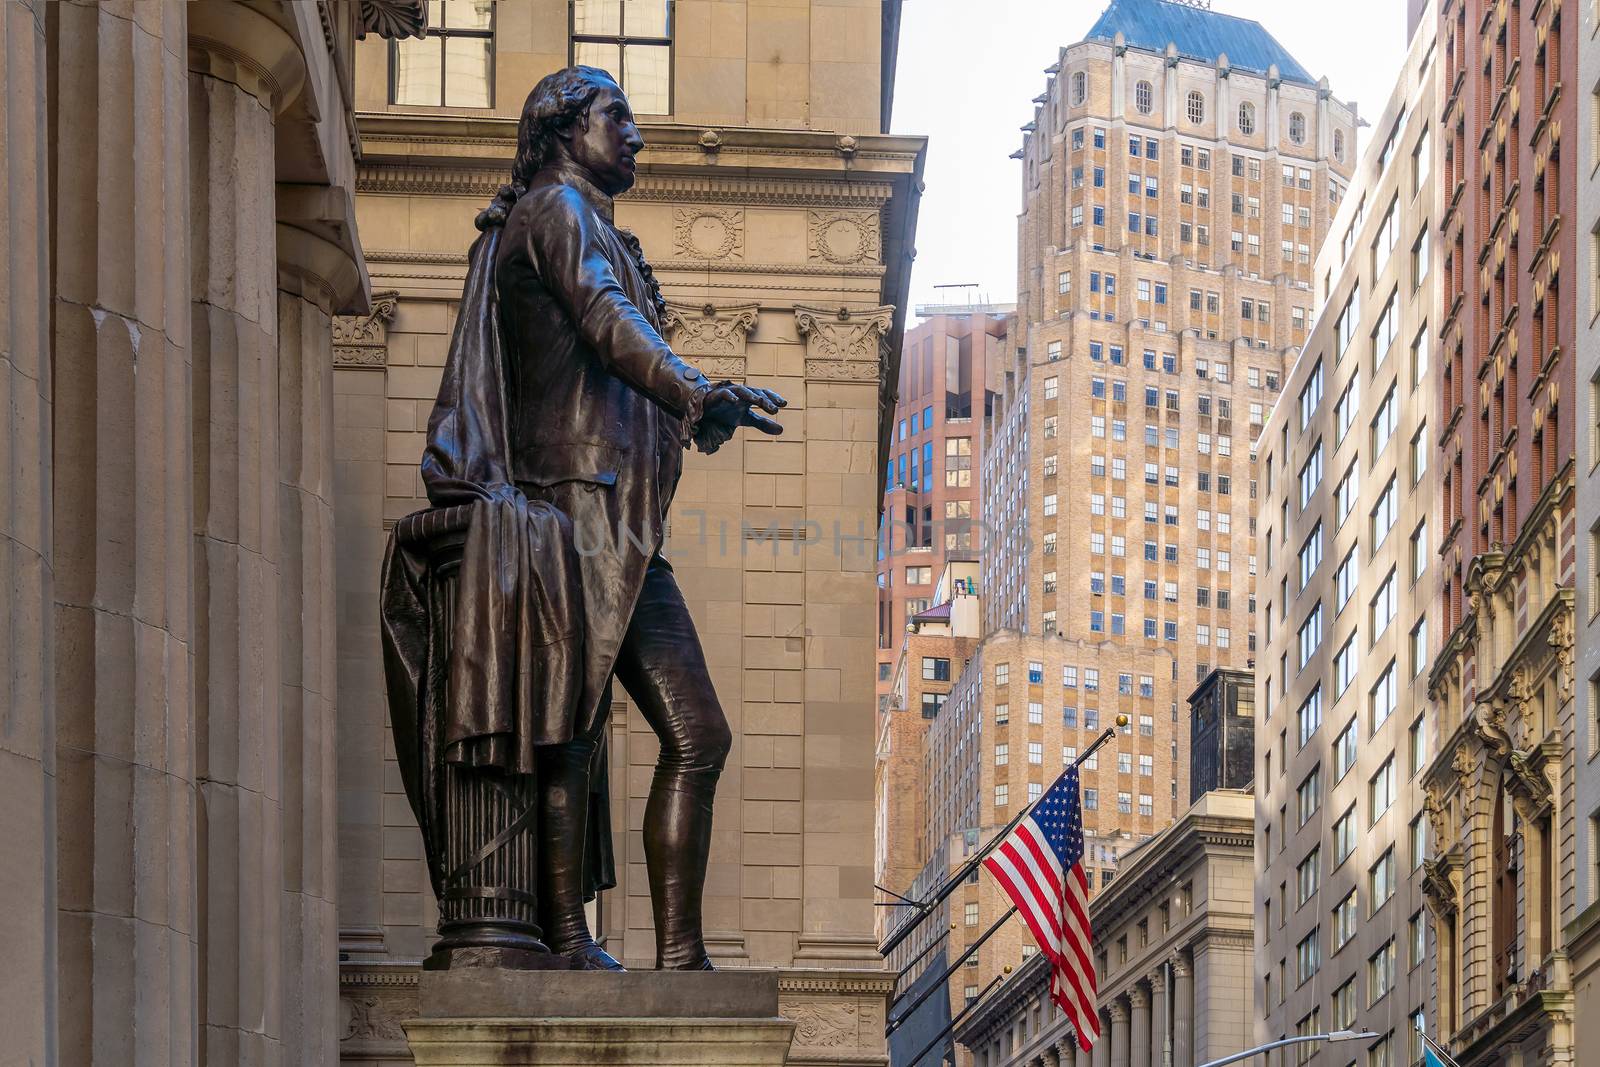 Wall Street  in Manhattan Finance district and Washington statue in the foreground